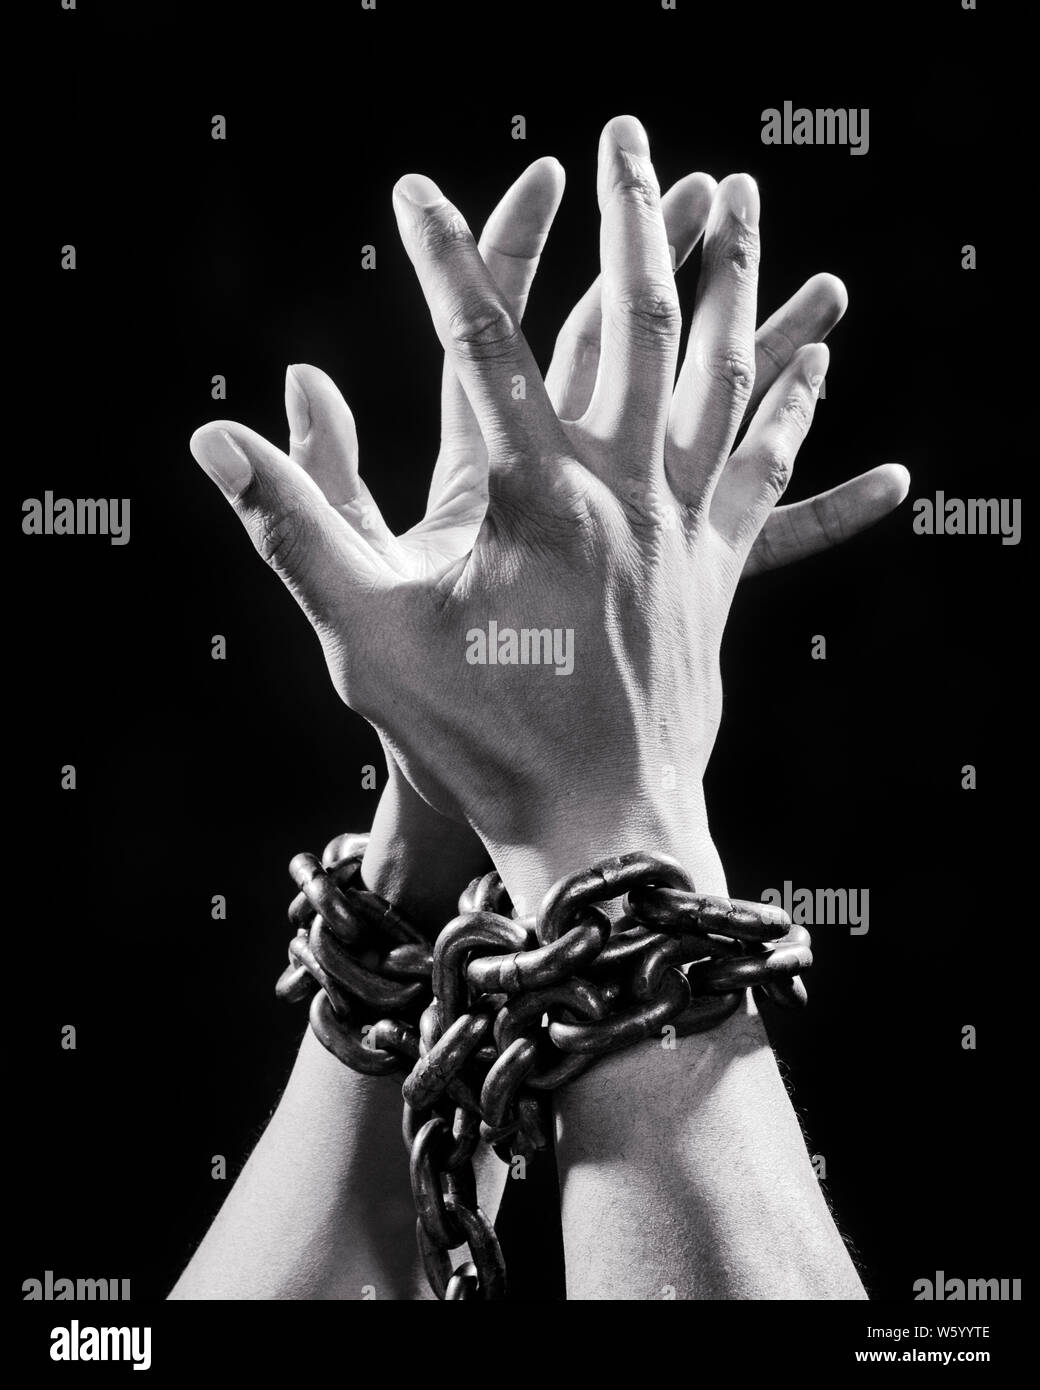 1970s HANDS OF A MAN PRISONER BOUND WITH CHAINS REACHING UP OUT TOWARDS LIGHT AND FREEDOM - s18600 HAR001 HARS CHAINED LEADERSHIP LOW ANGLE PRISONER AGONY CAUGHT CHAINS A OF UP CONCEPT CONCEPTUAL ESCAPE SYMBOLIC CAPTIVE CONCEPTS MID-ADULT MID-ADULT MAN BLACK AND WHITE BOUND CAPTURED HANDS ONLY HAR001 OLD FASHIONED REPRESENTATION RESTRICTED Stock Photo